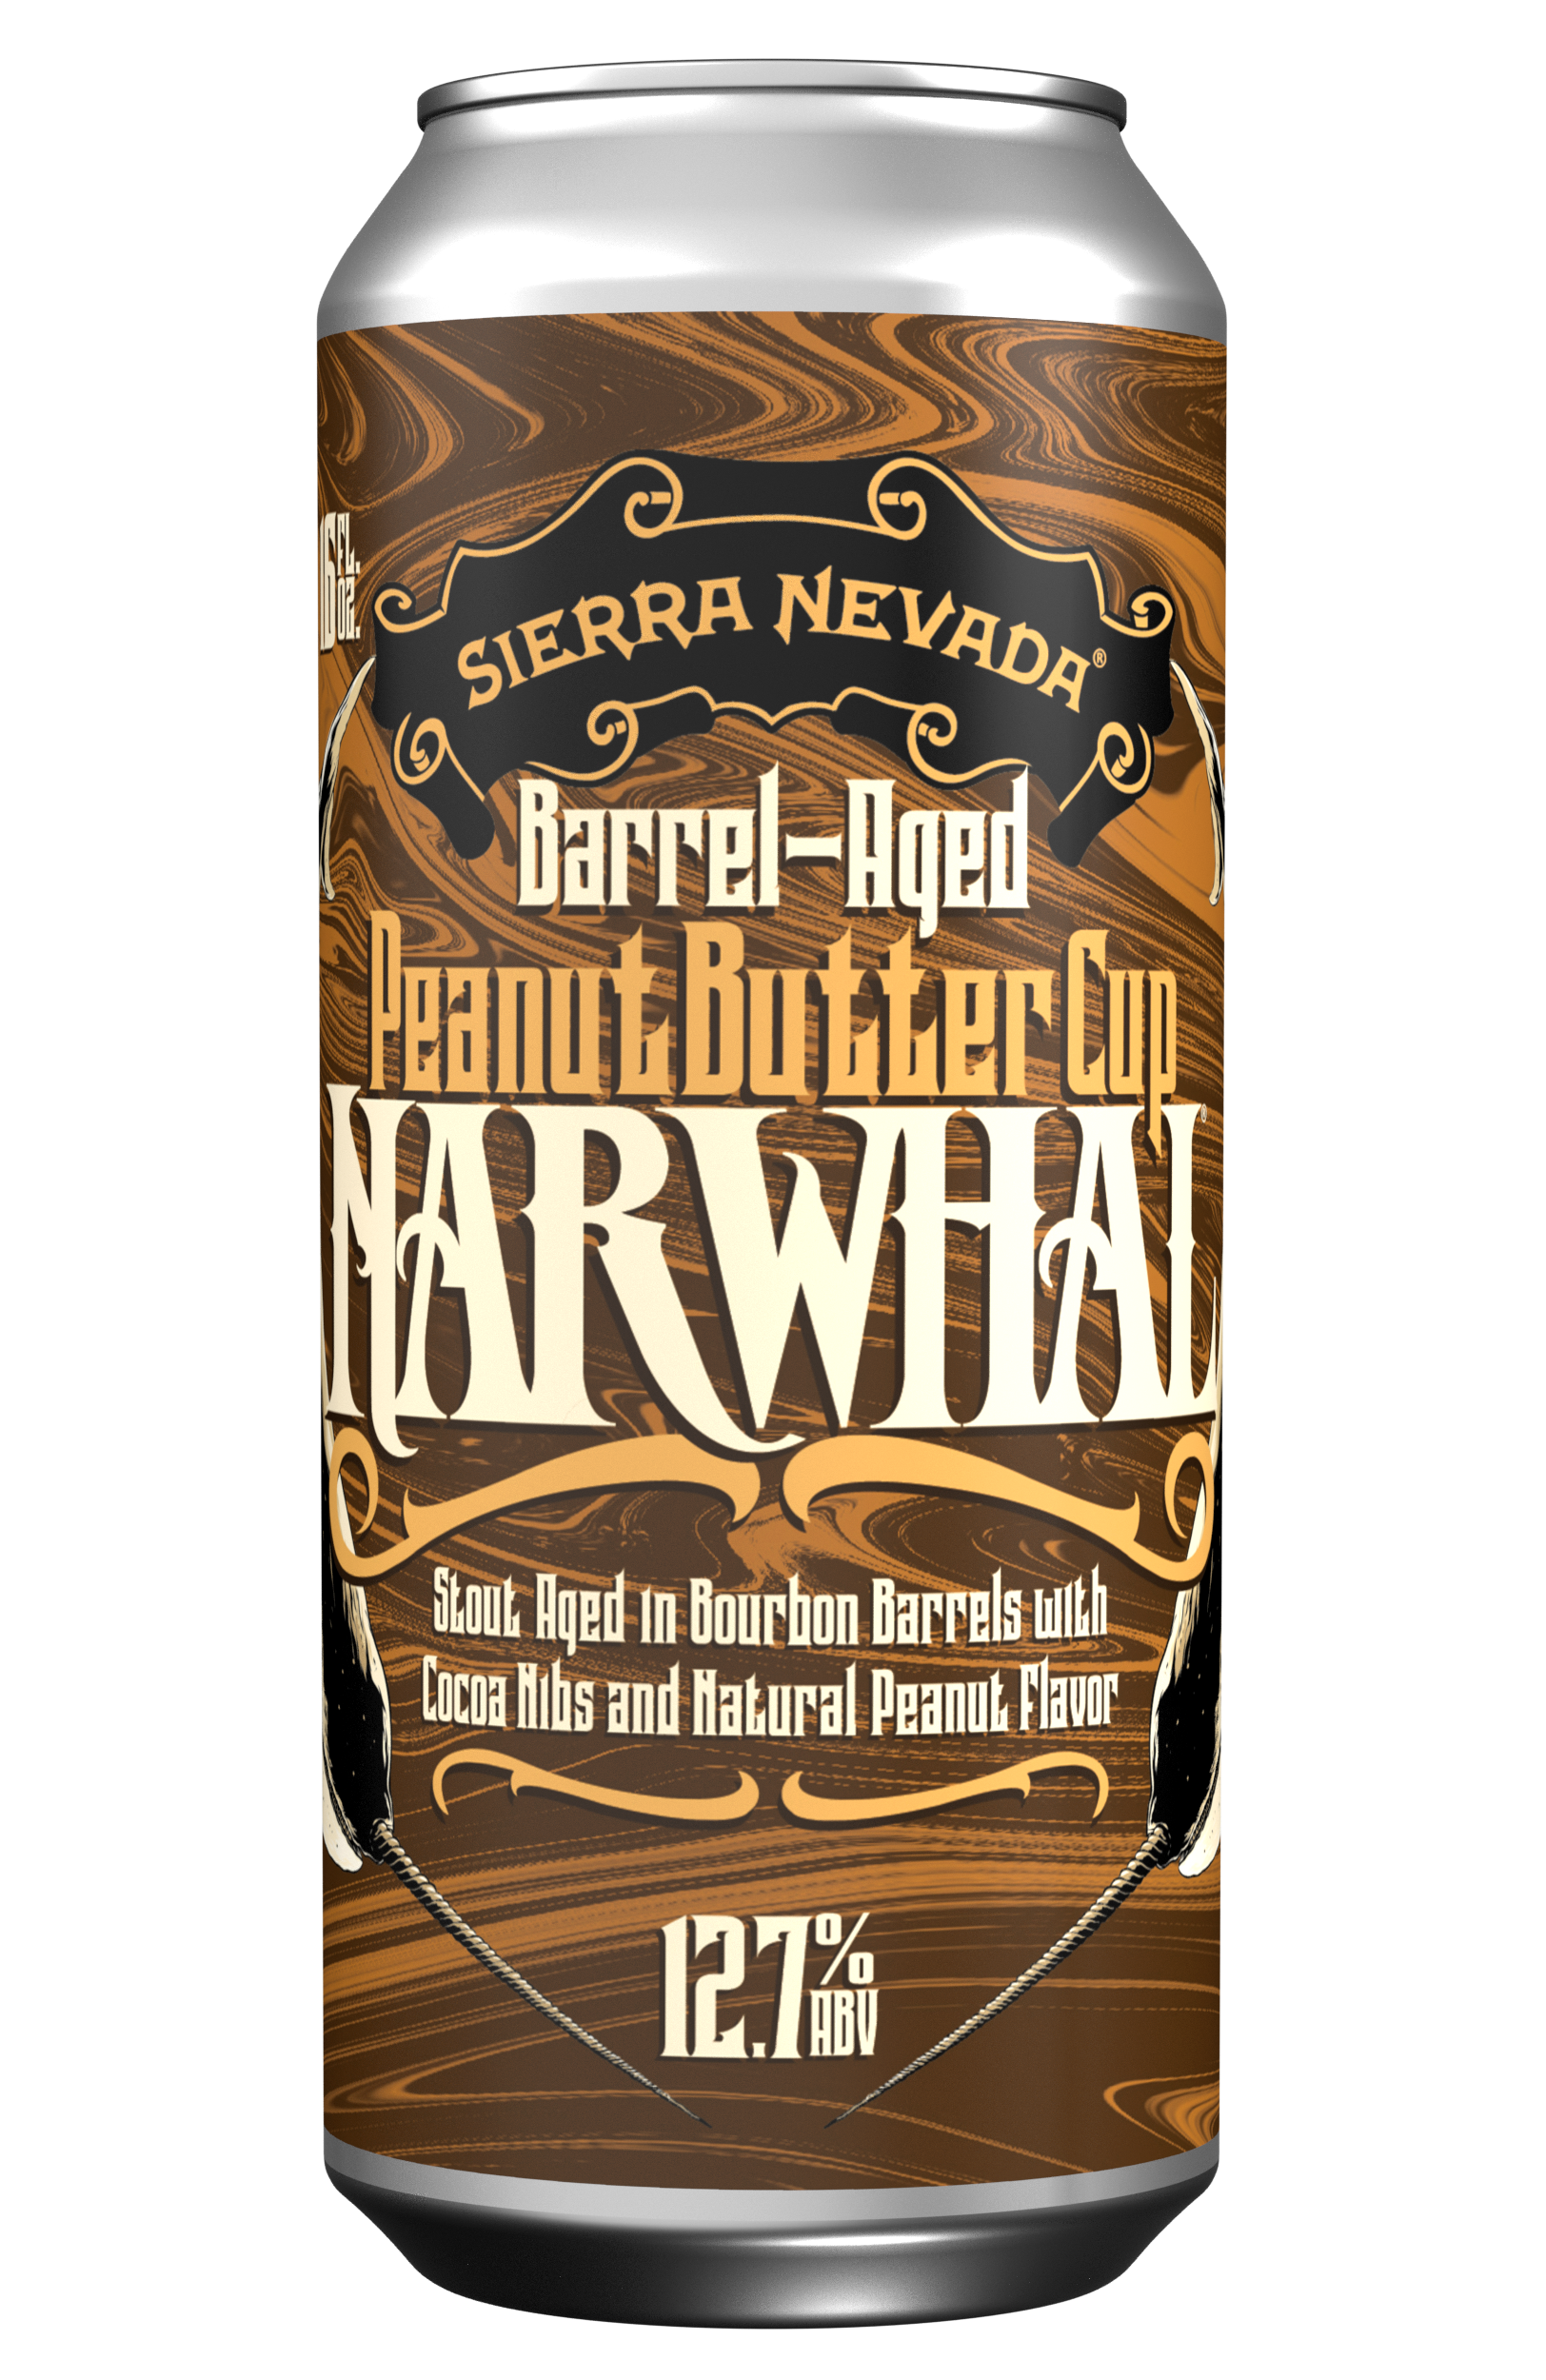 Sierra Nevada Brewing Co. Barrel Aged Peanut Butter Cup Narwhal 16 oz. can